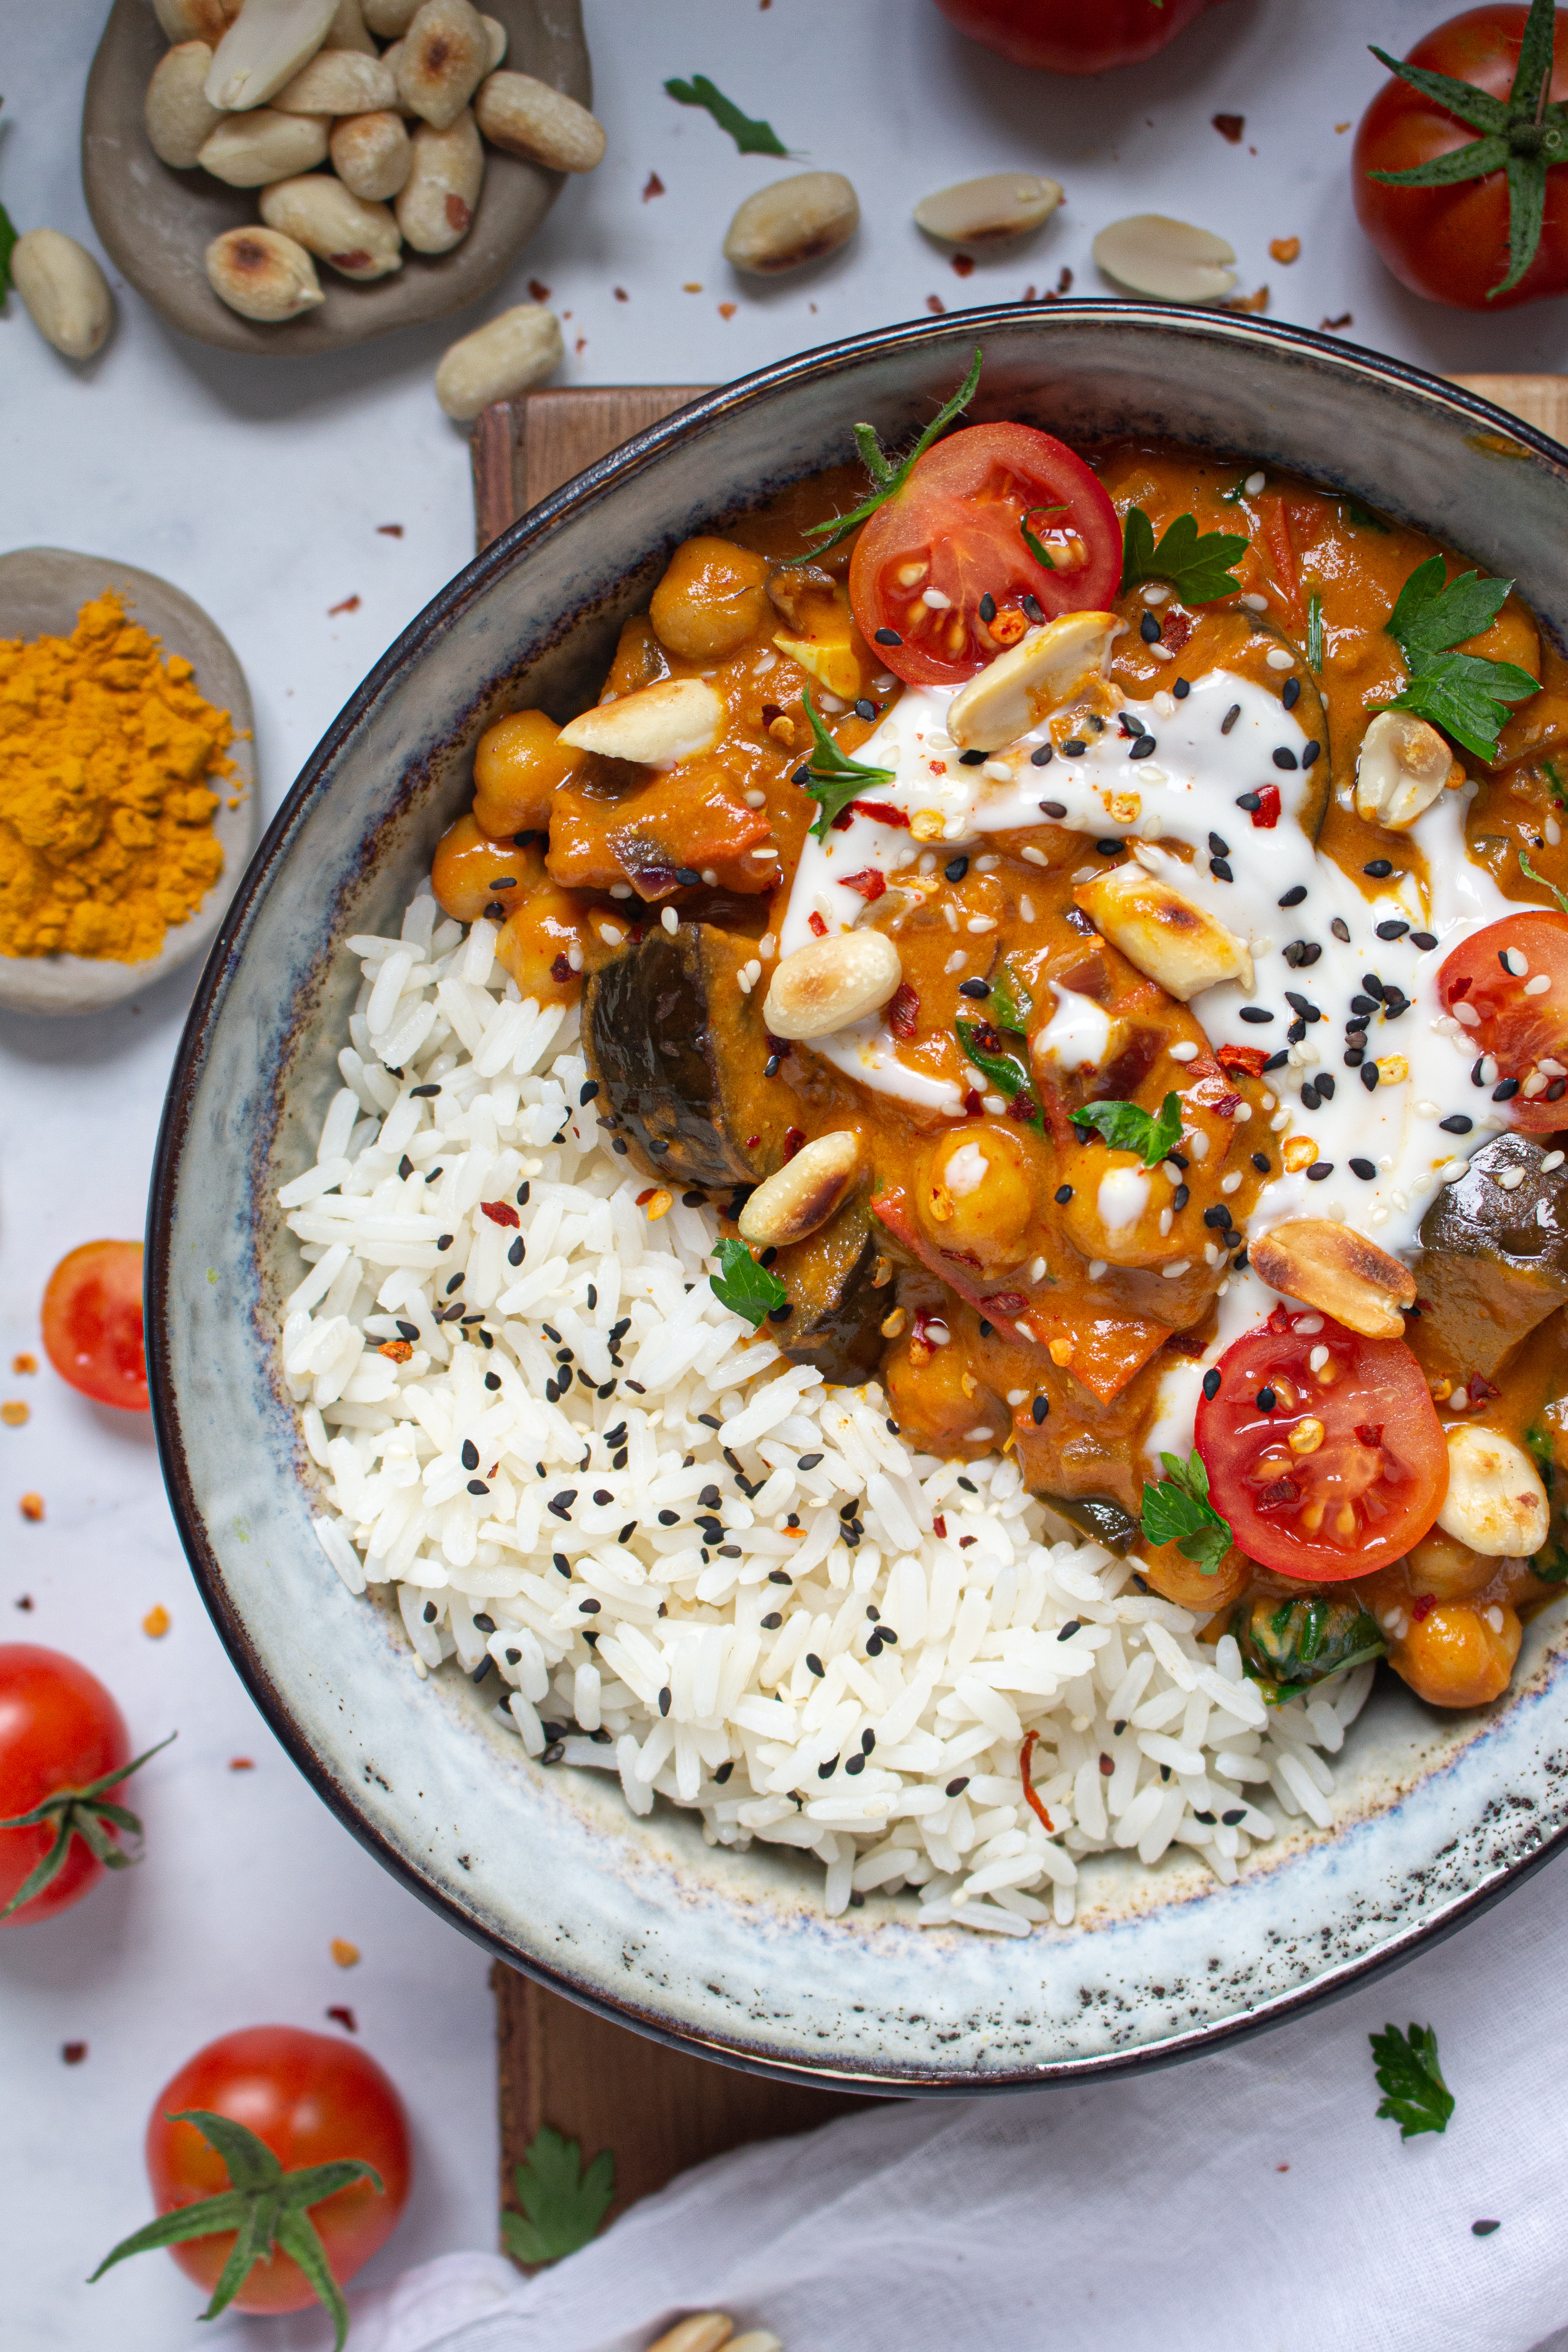 Golden Chickpea and Aubergine Peanut Curry